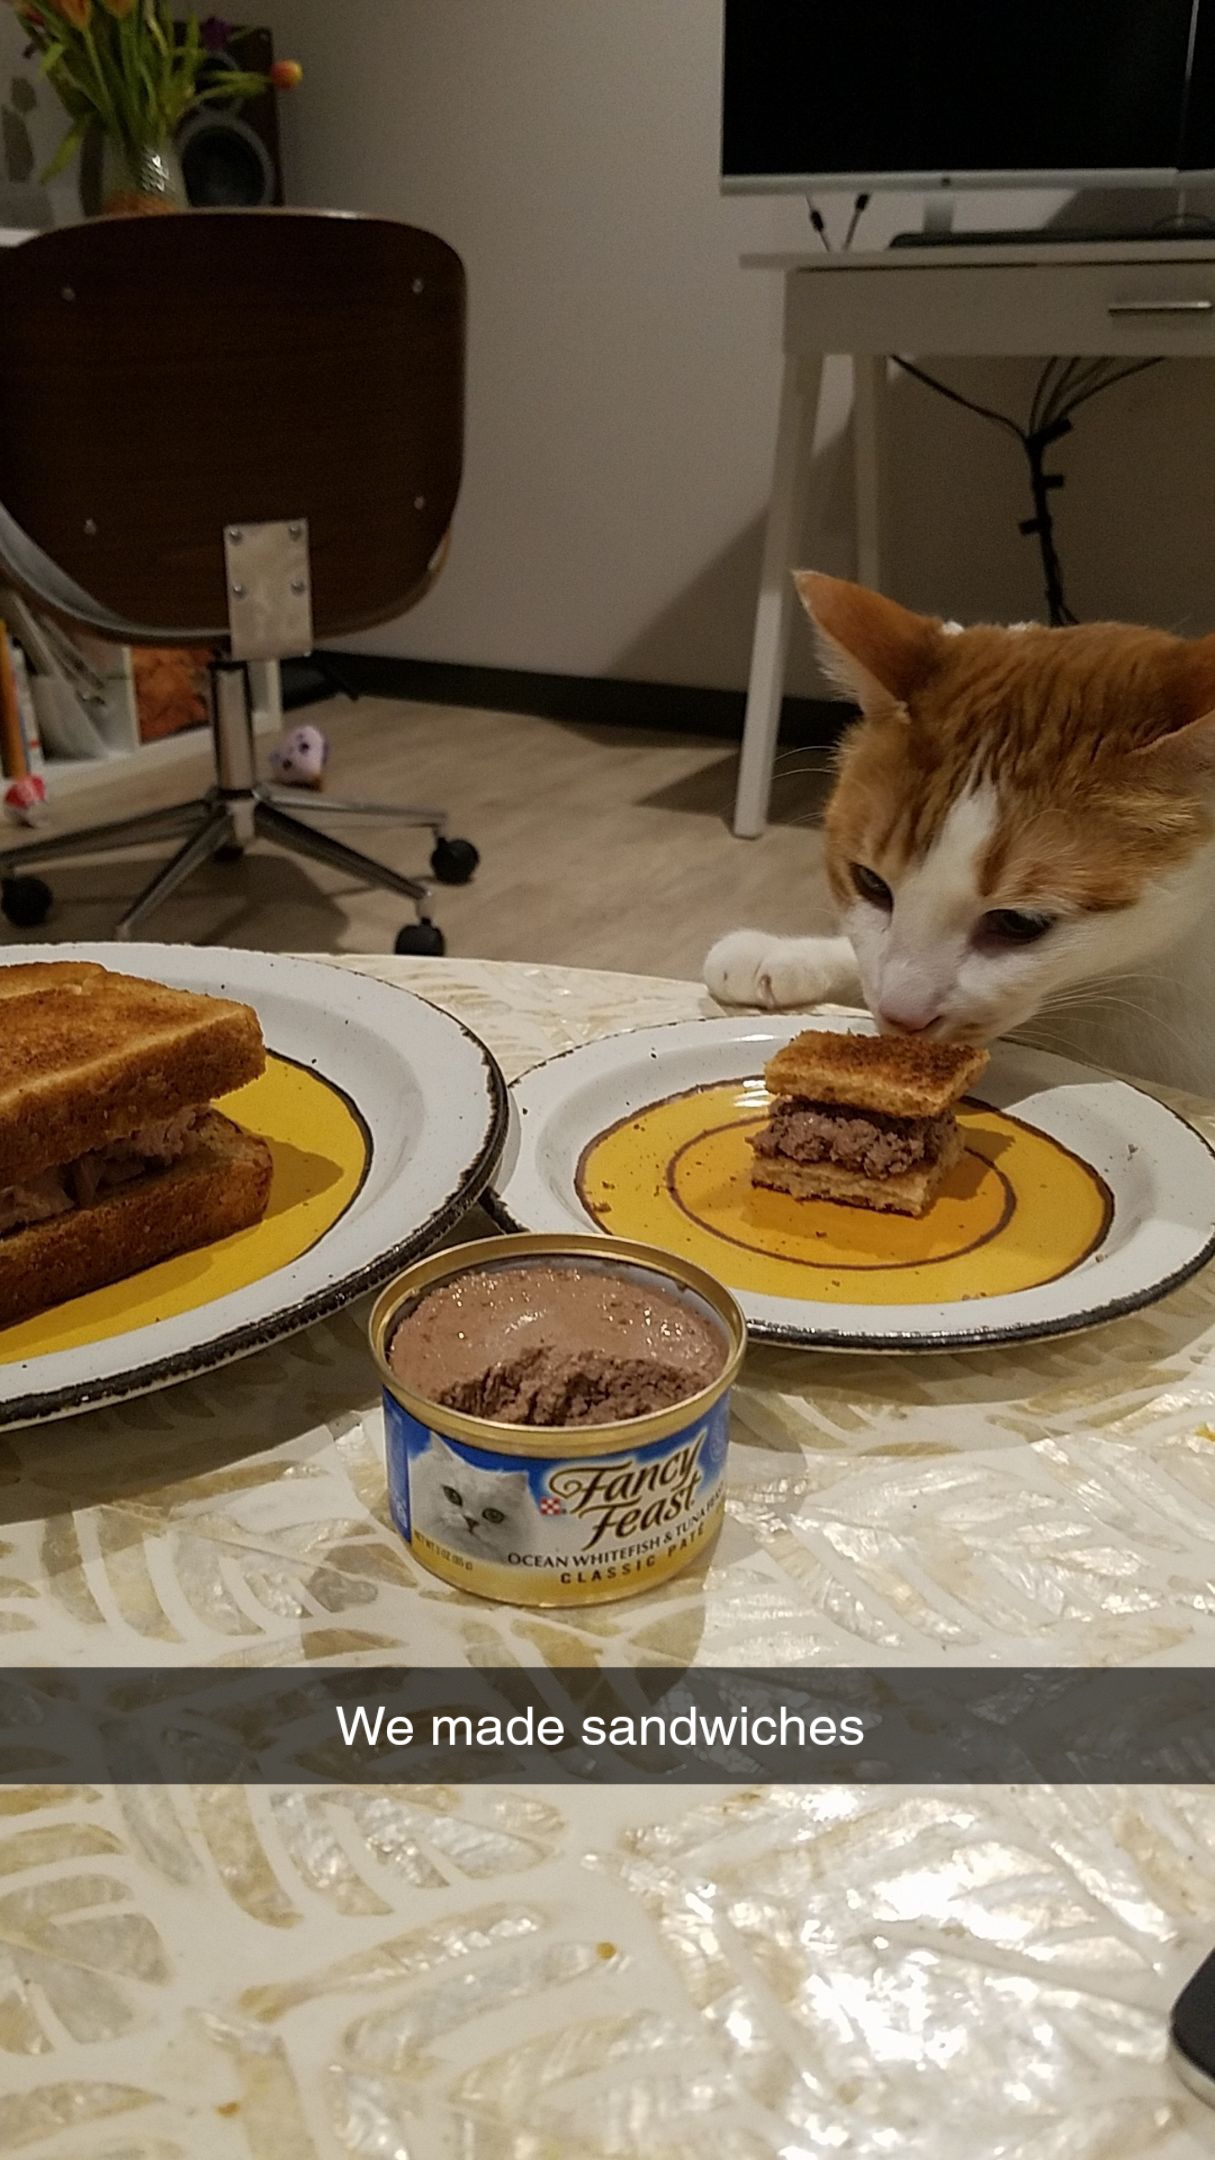 Cats can have a little toast.